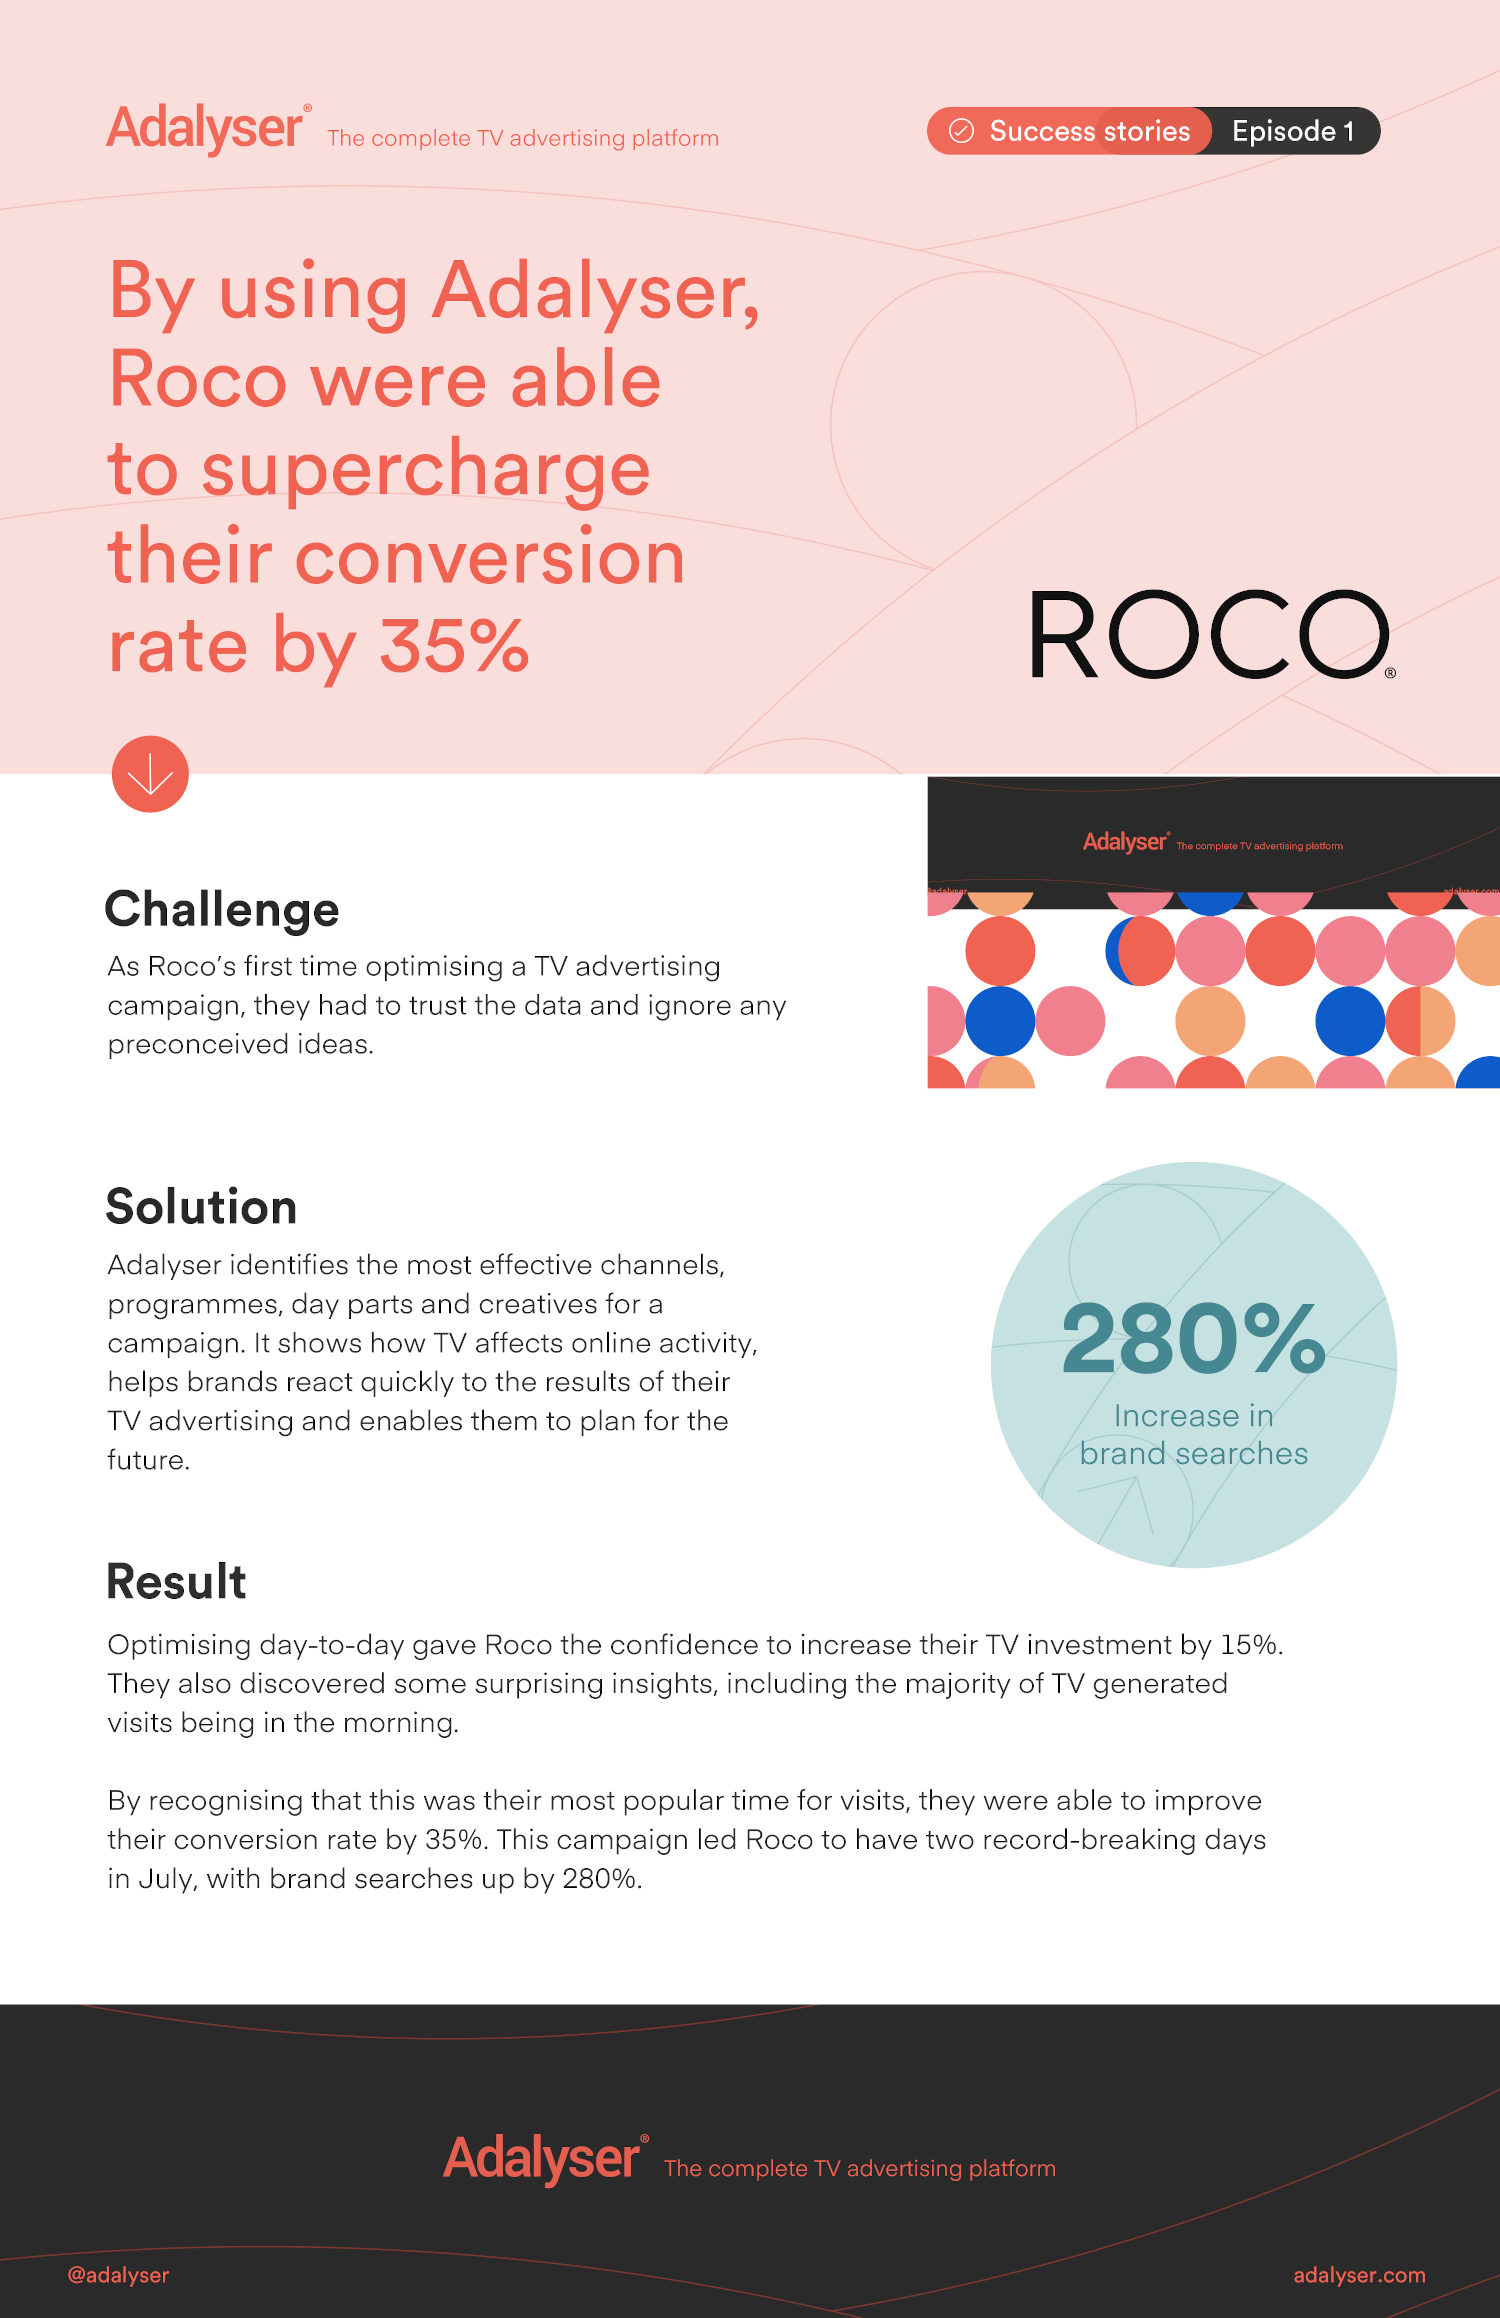 infographic analysing roco's success story and the benefits of using adalyser